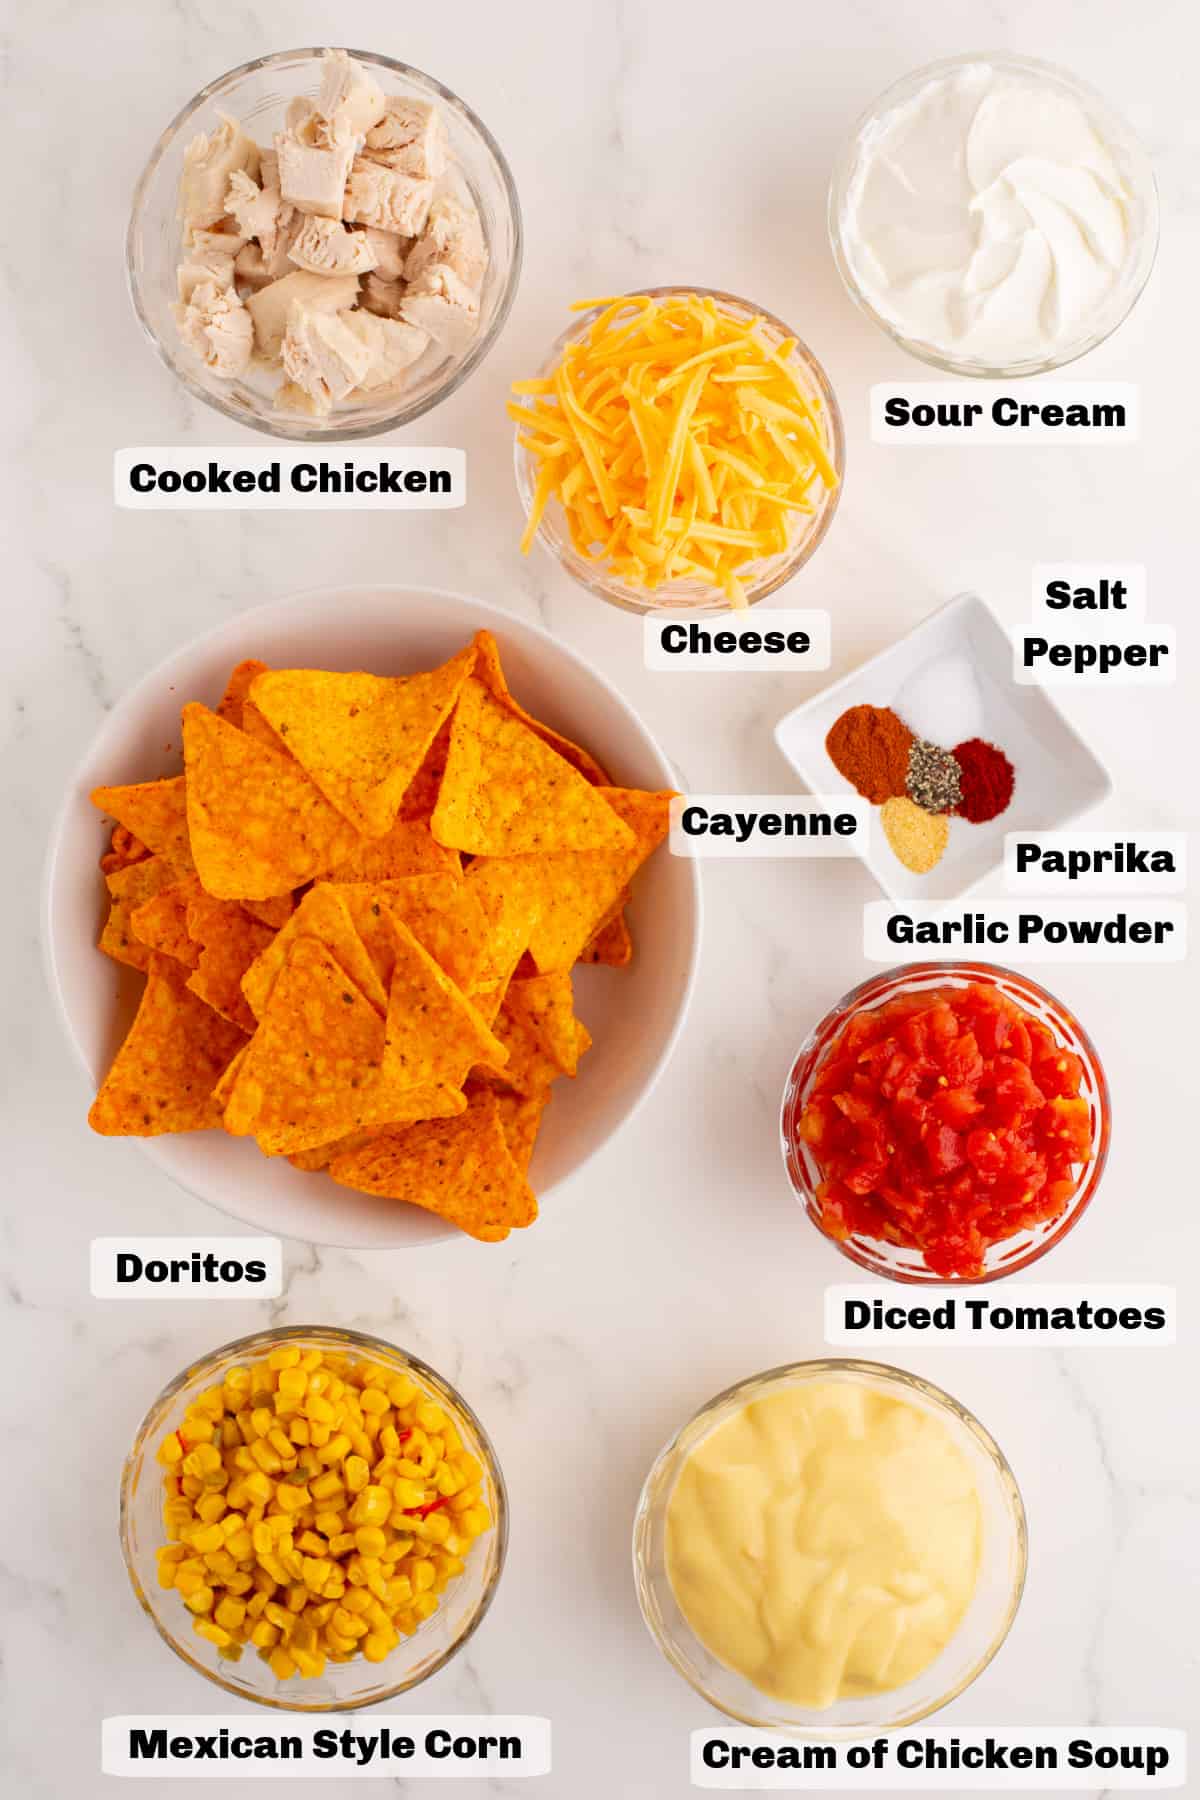 ingredients on a table, with Doritos Chicken Casserole